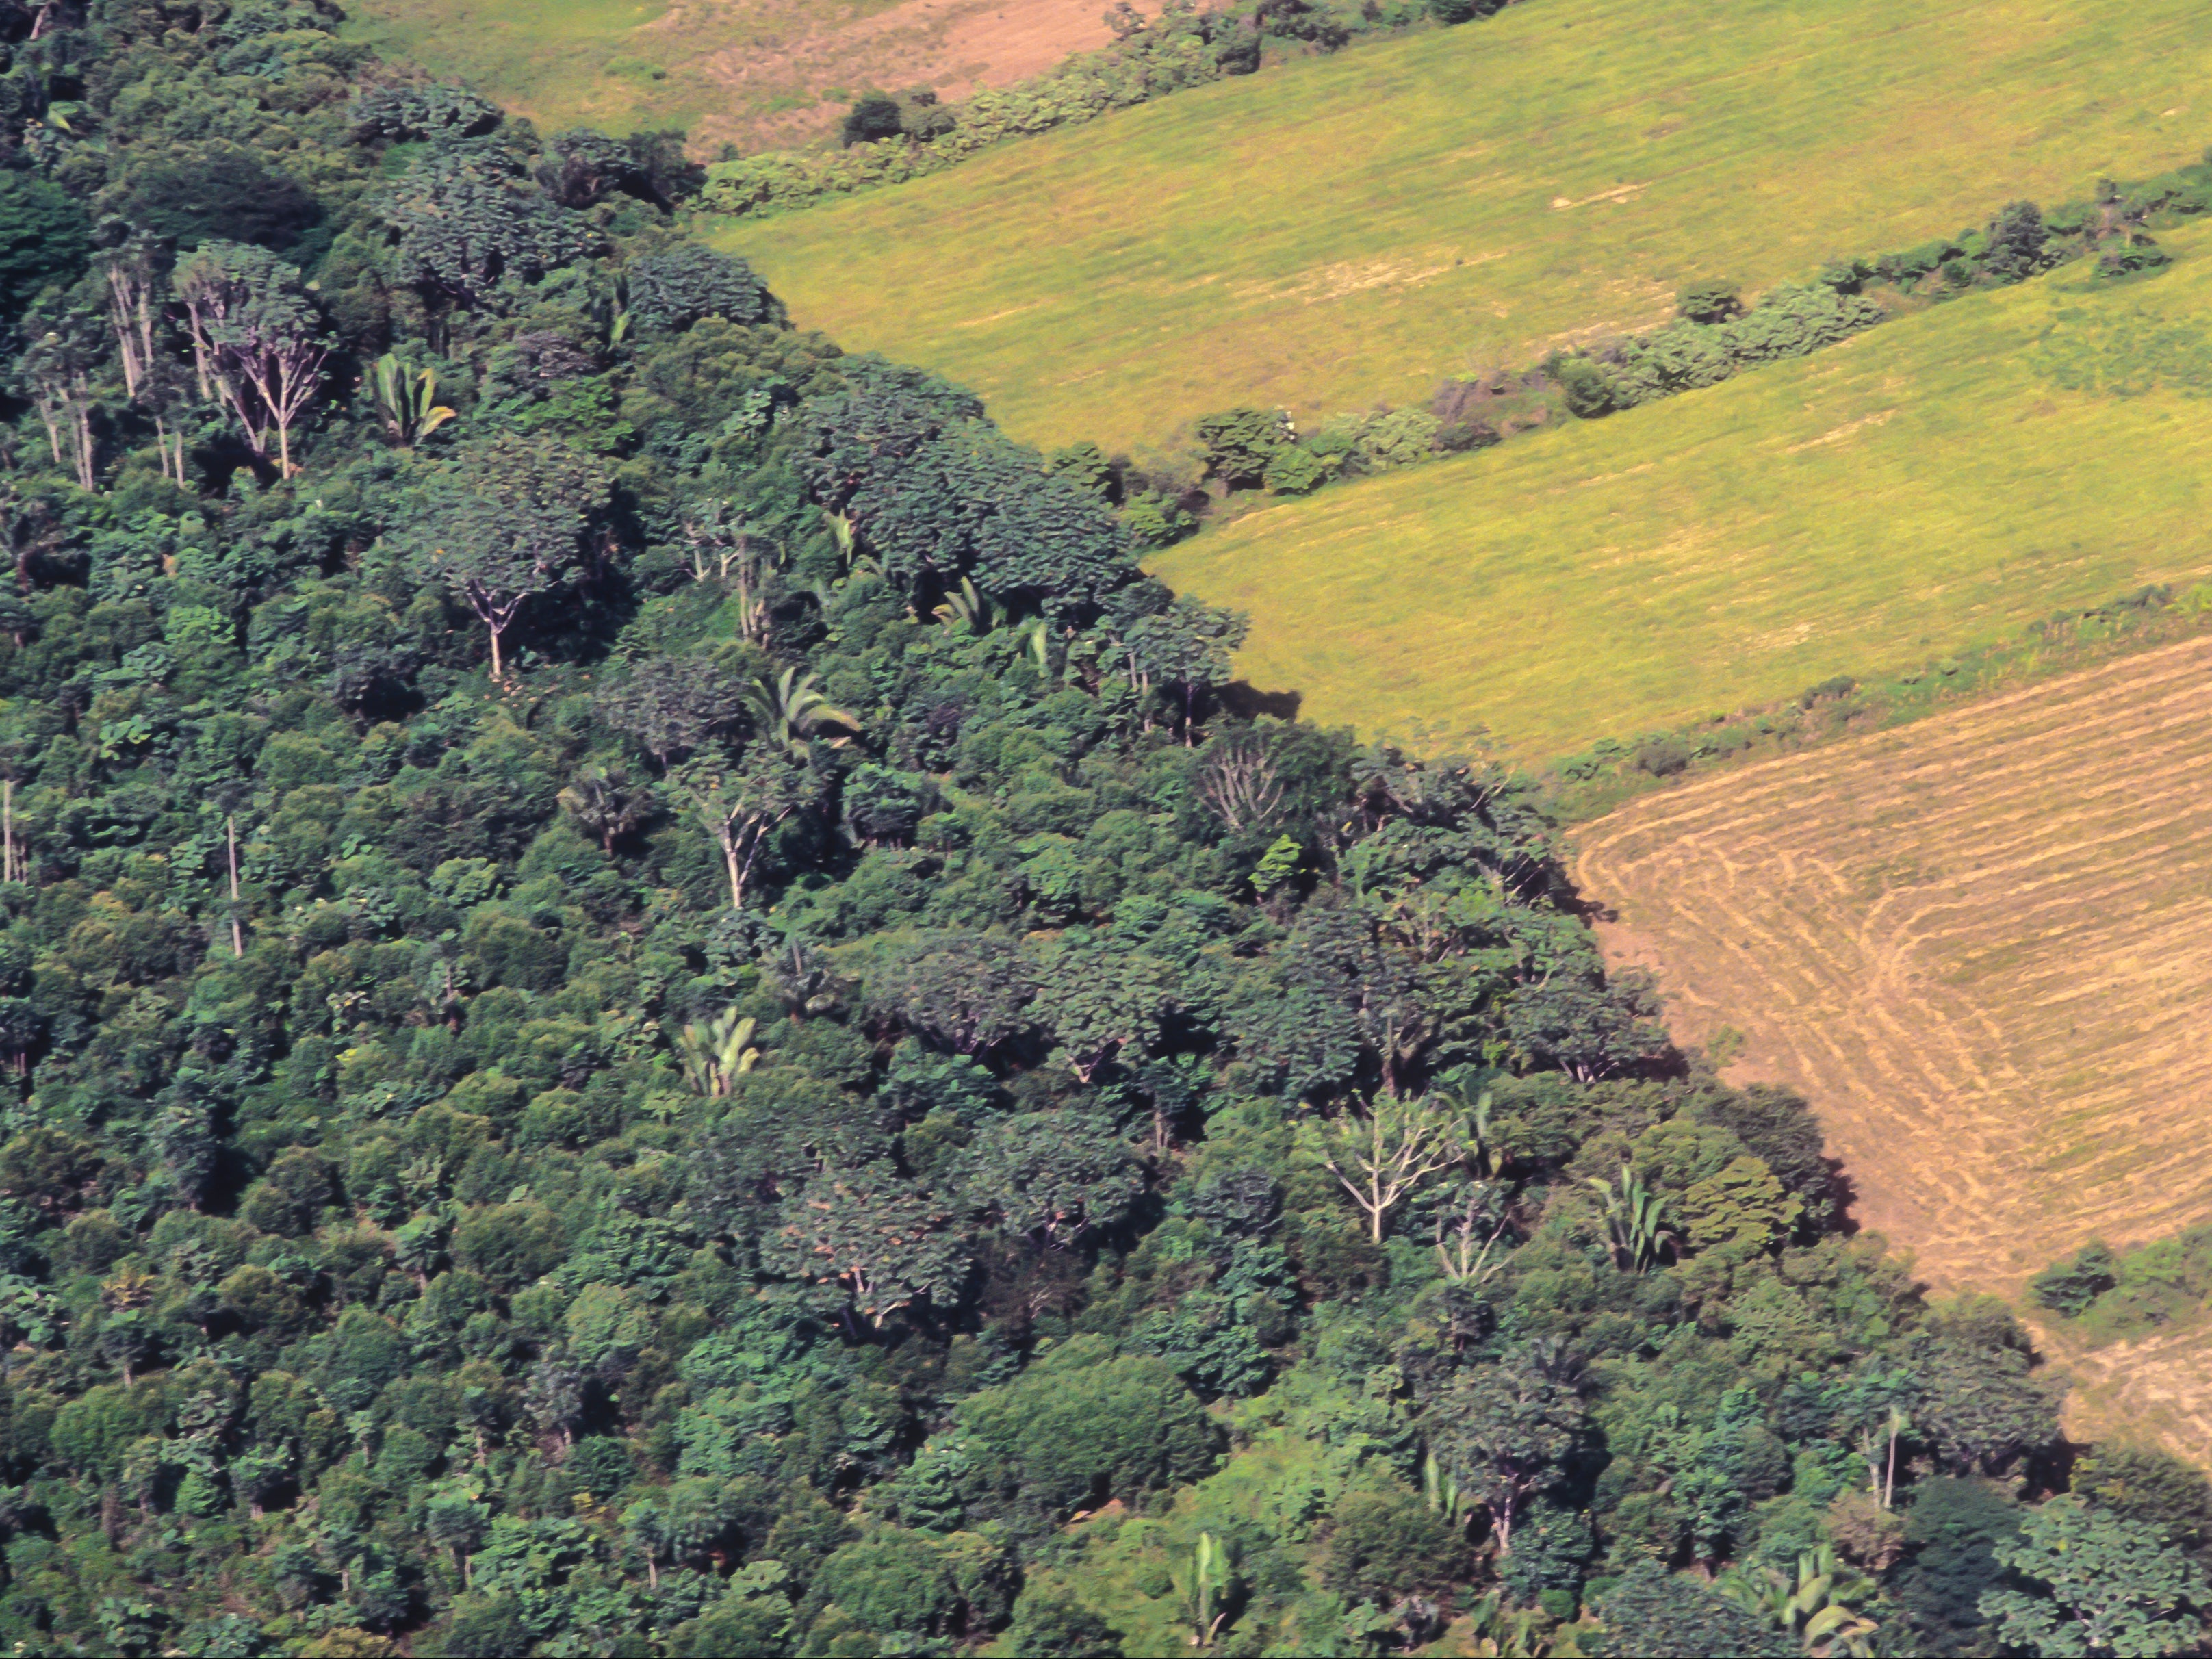 Soya farm field besides the original forest of the Amazon in Brazil